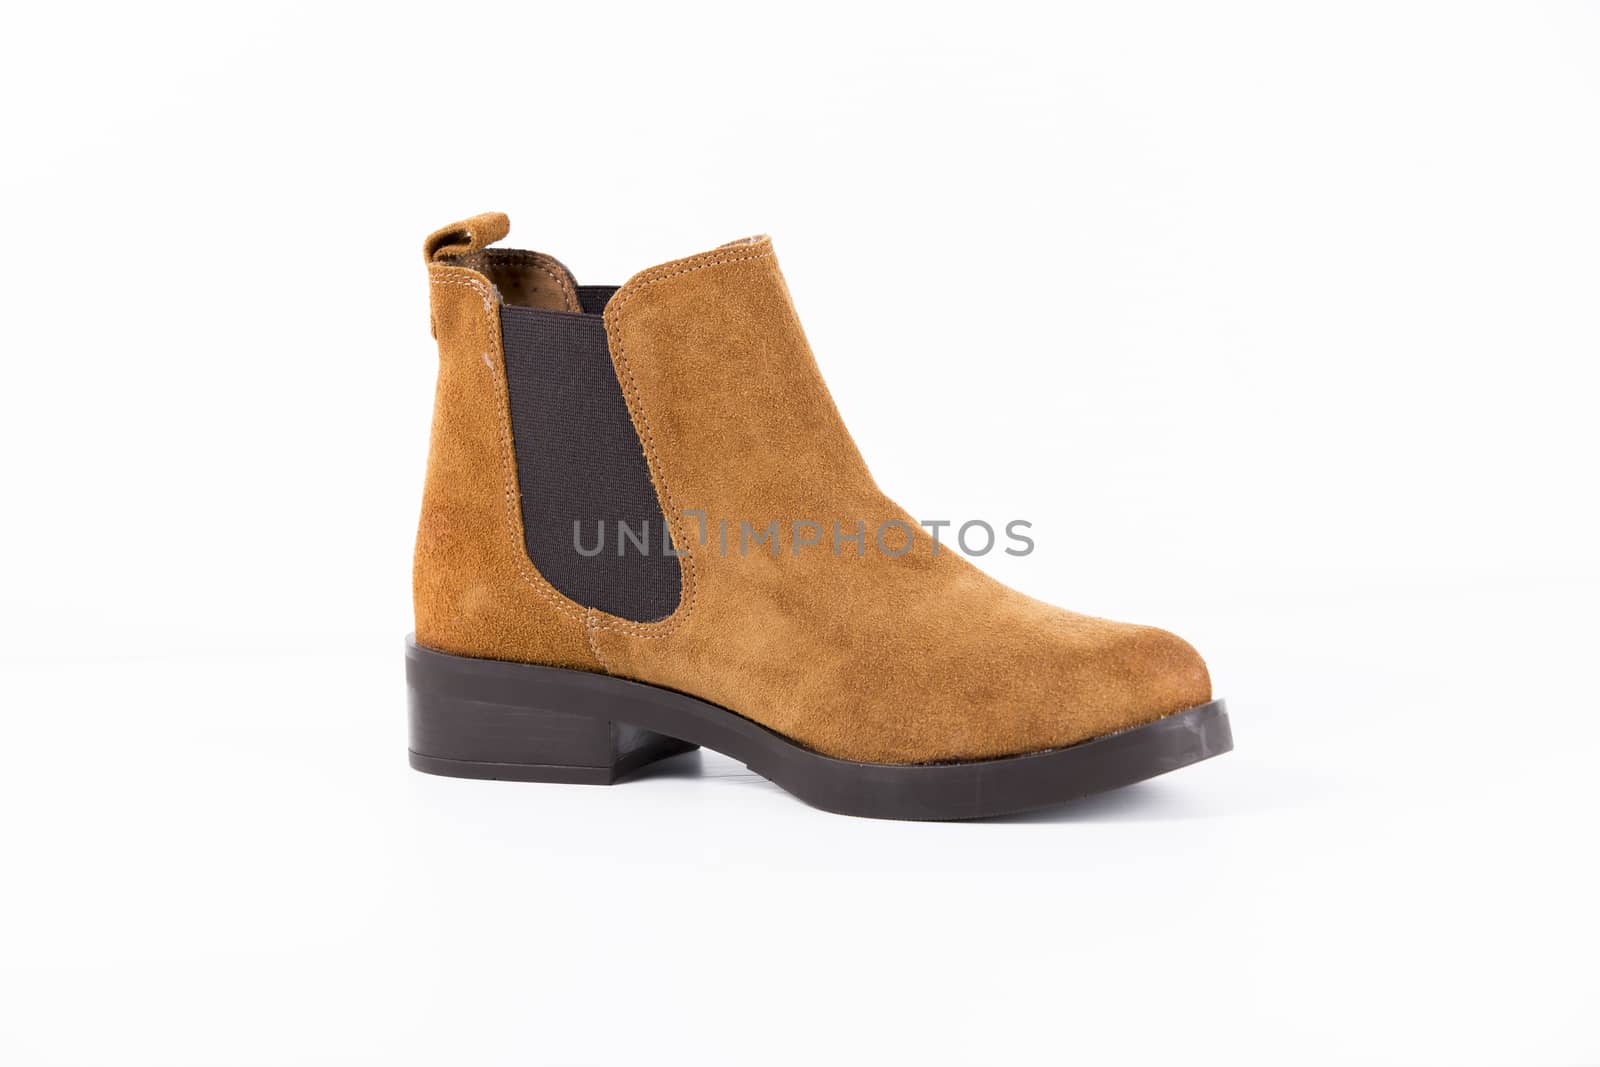 Brown leather boot on white background, isolated product.